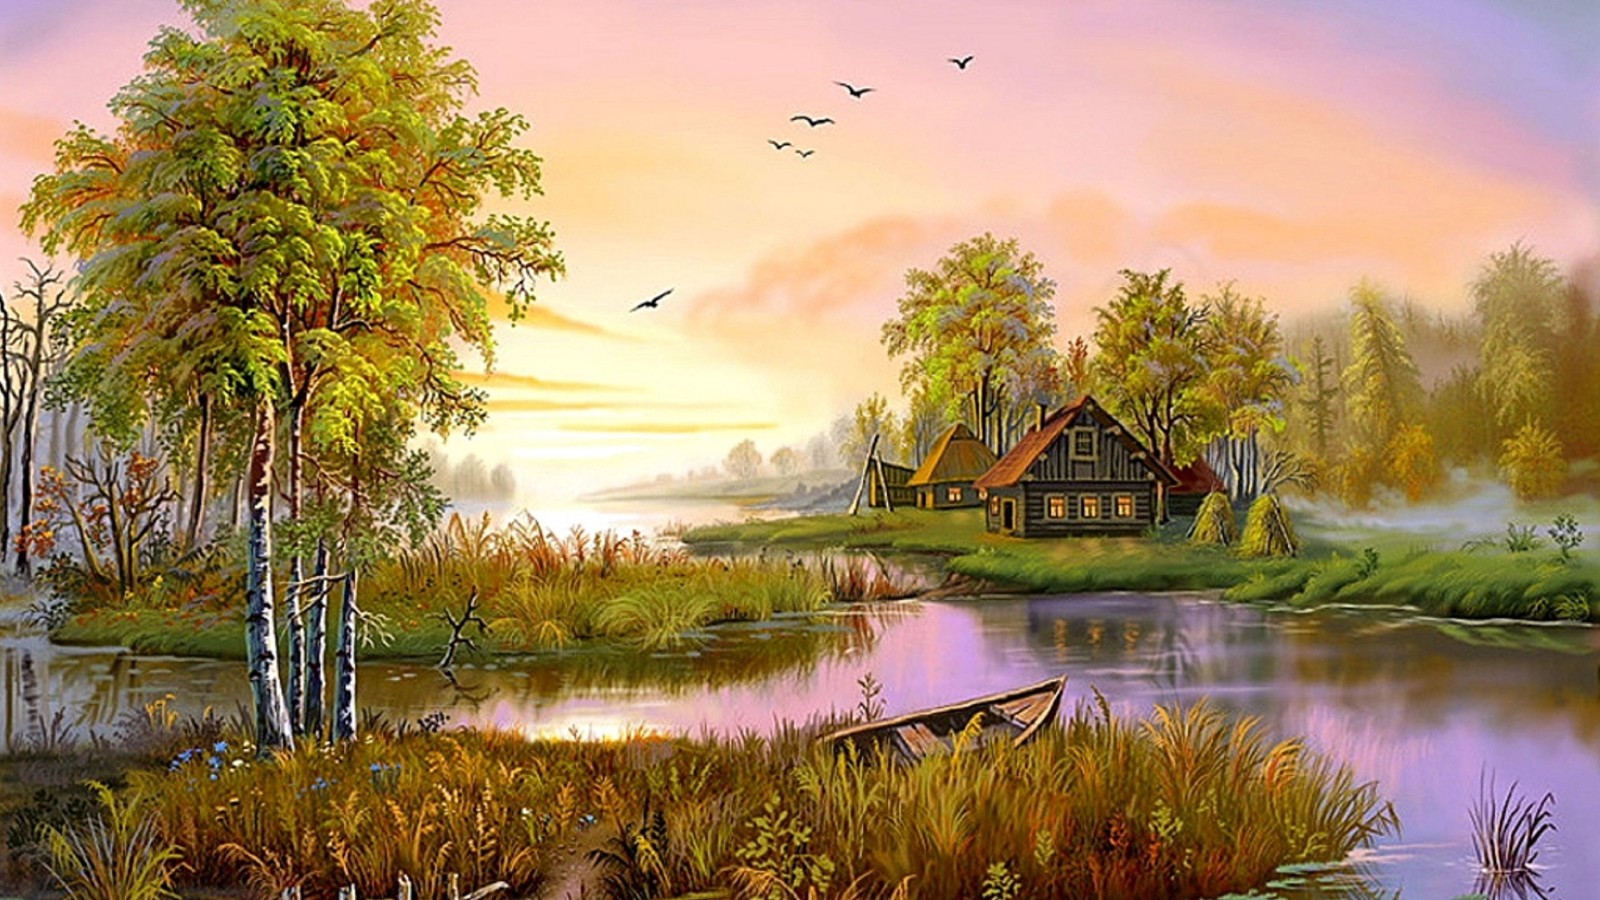 background wallpaper download,natural landscape,nature,painting,morning,watercolor paint